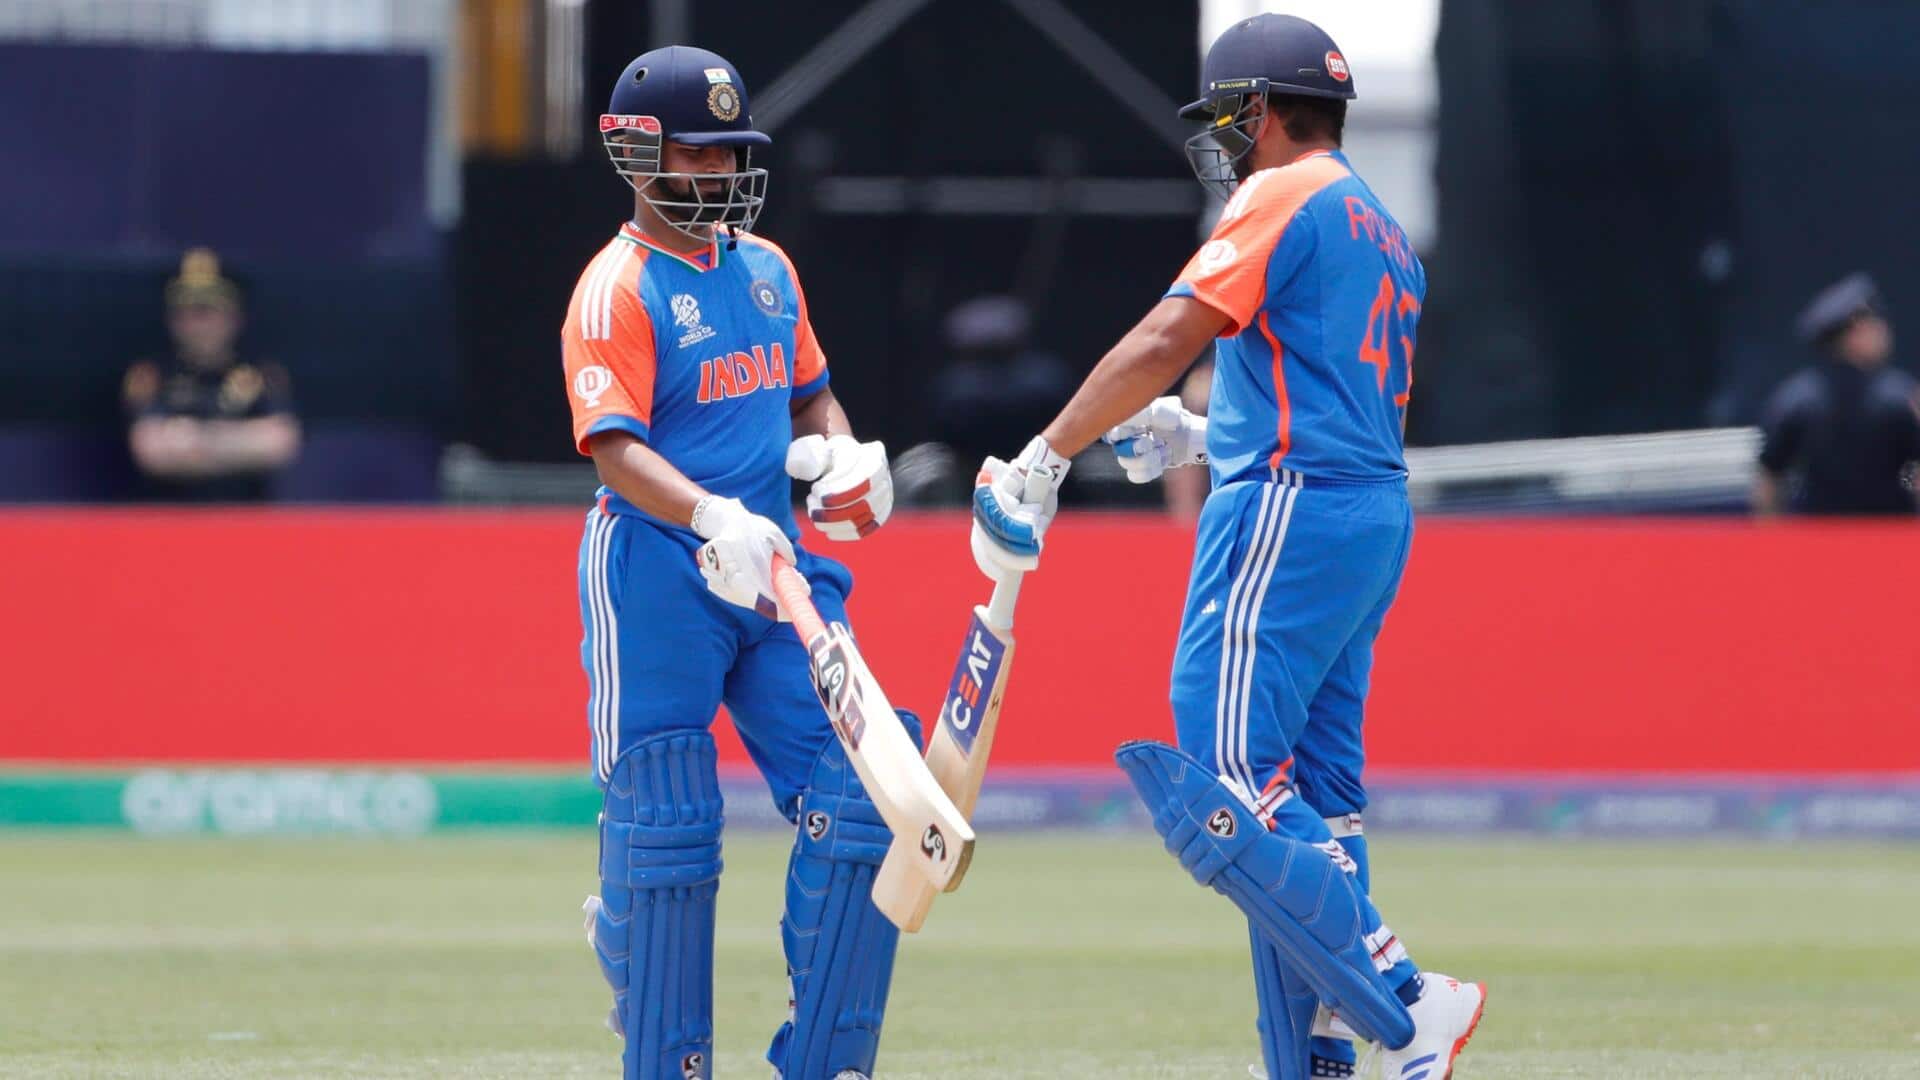 ICC T20 World Cup: Key stats of India versus Pakistan